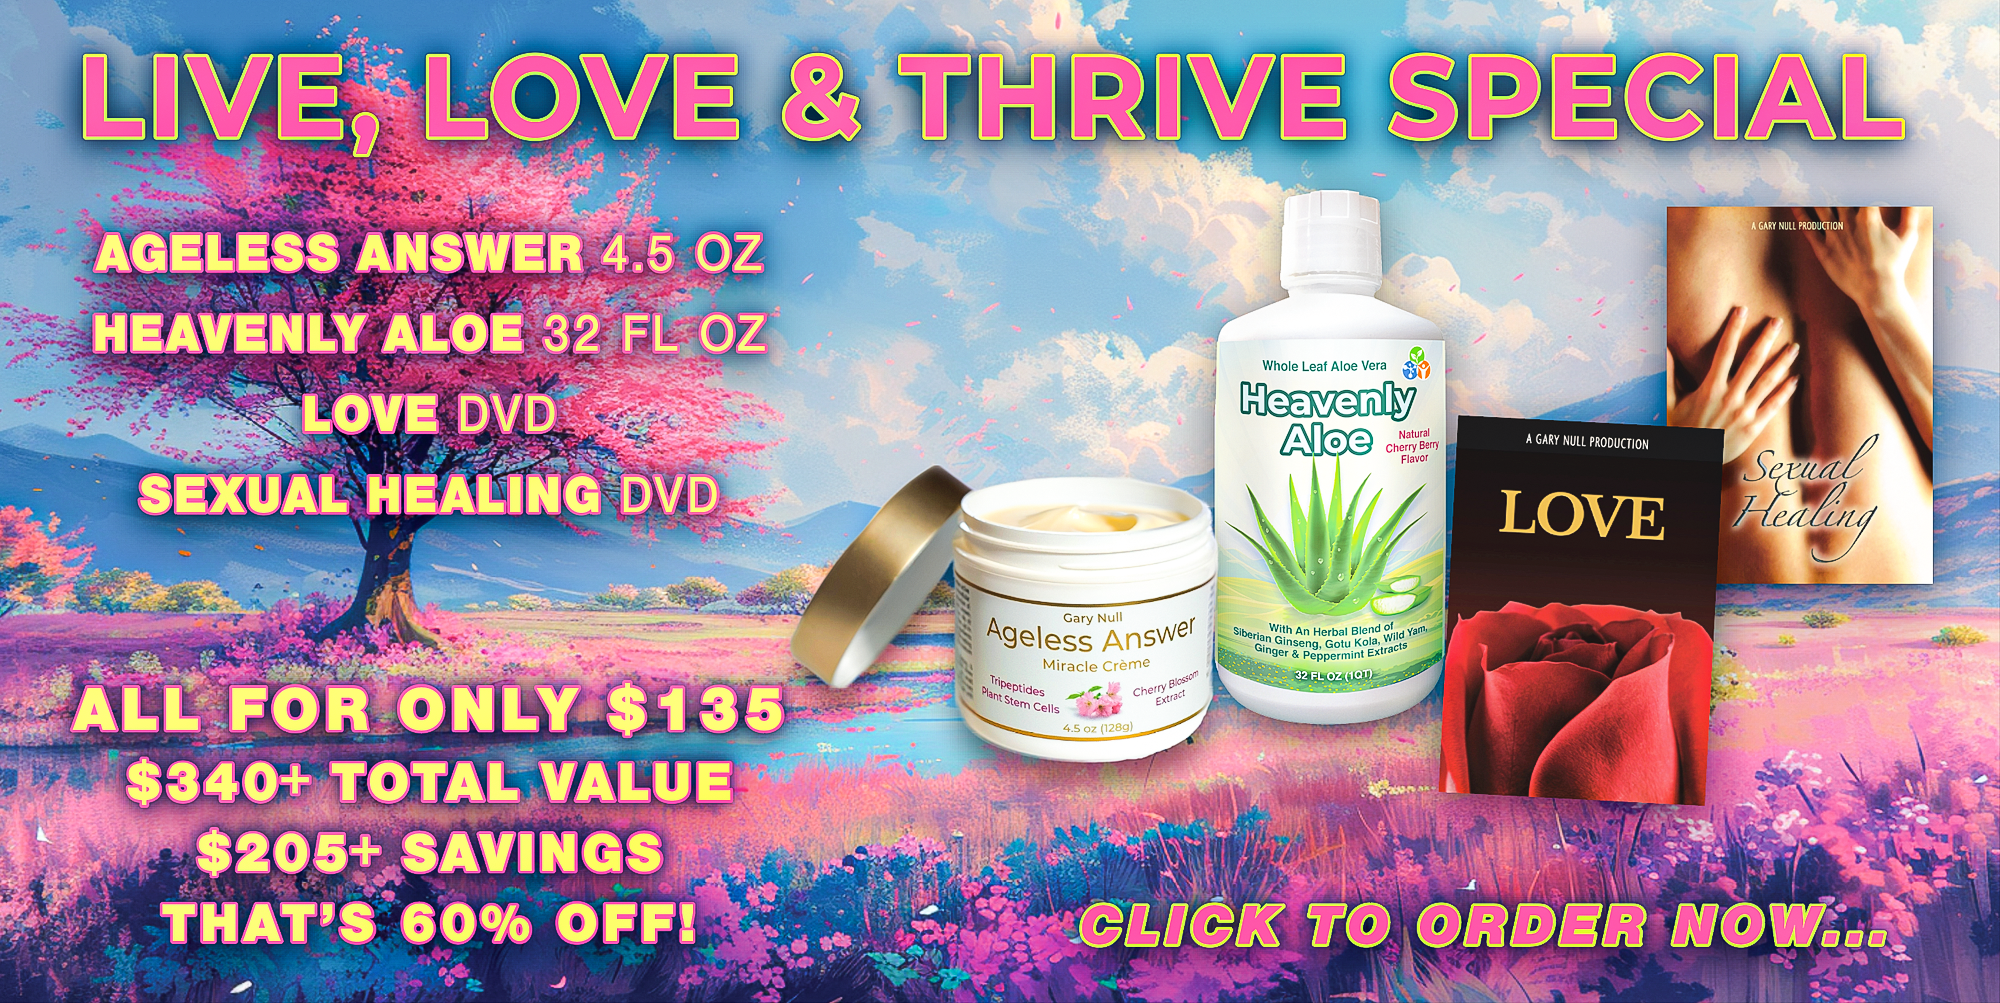 Valentine's Day Special: Ageless Answer Miracle Cream, Heavenly Aloe, with 2 FREE DVDs